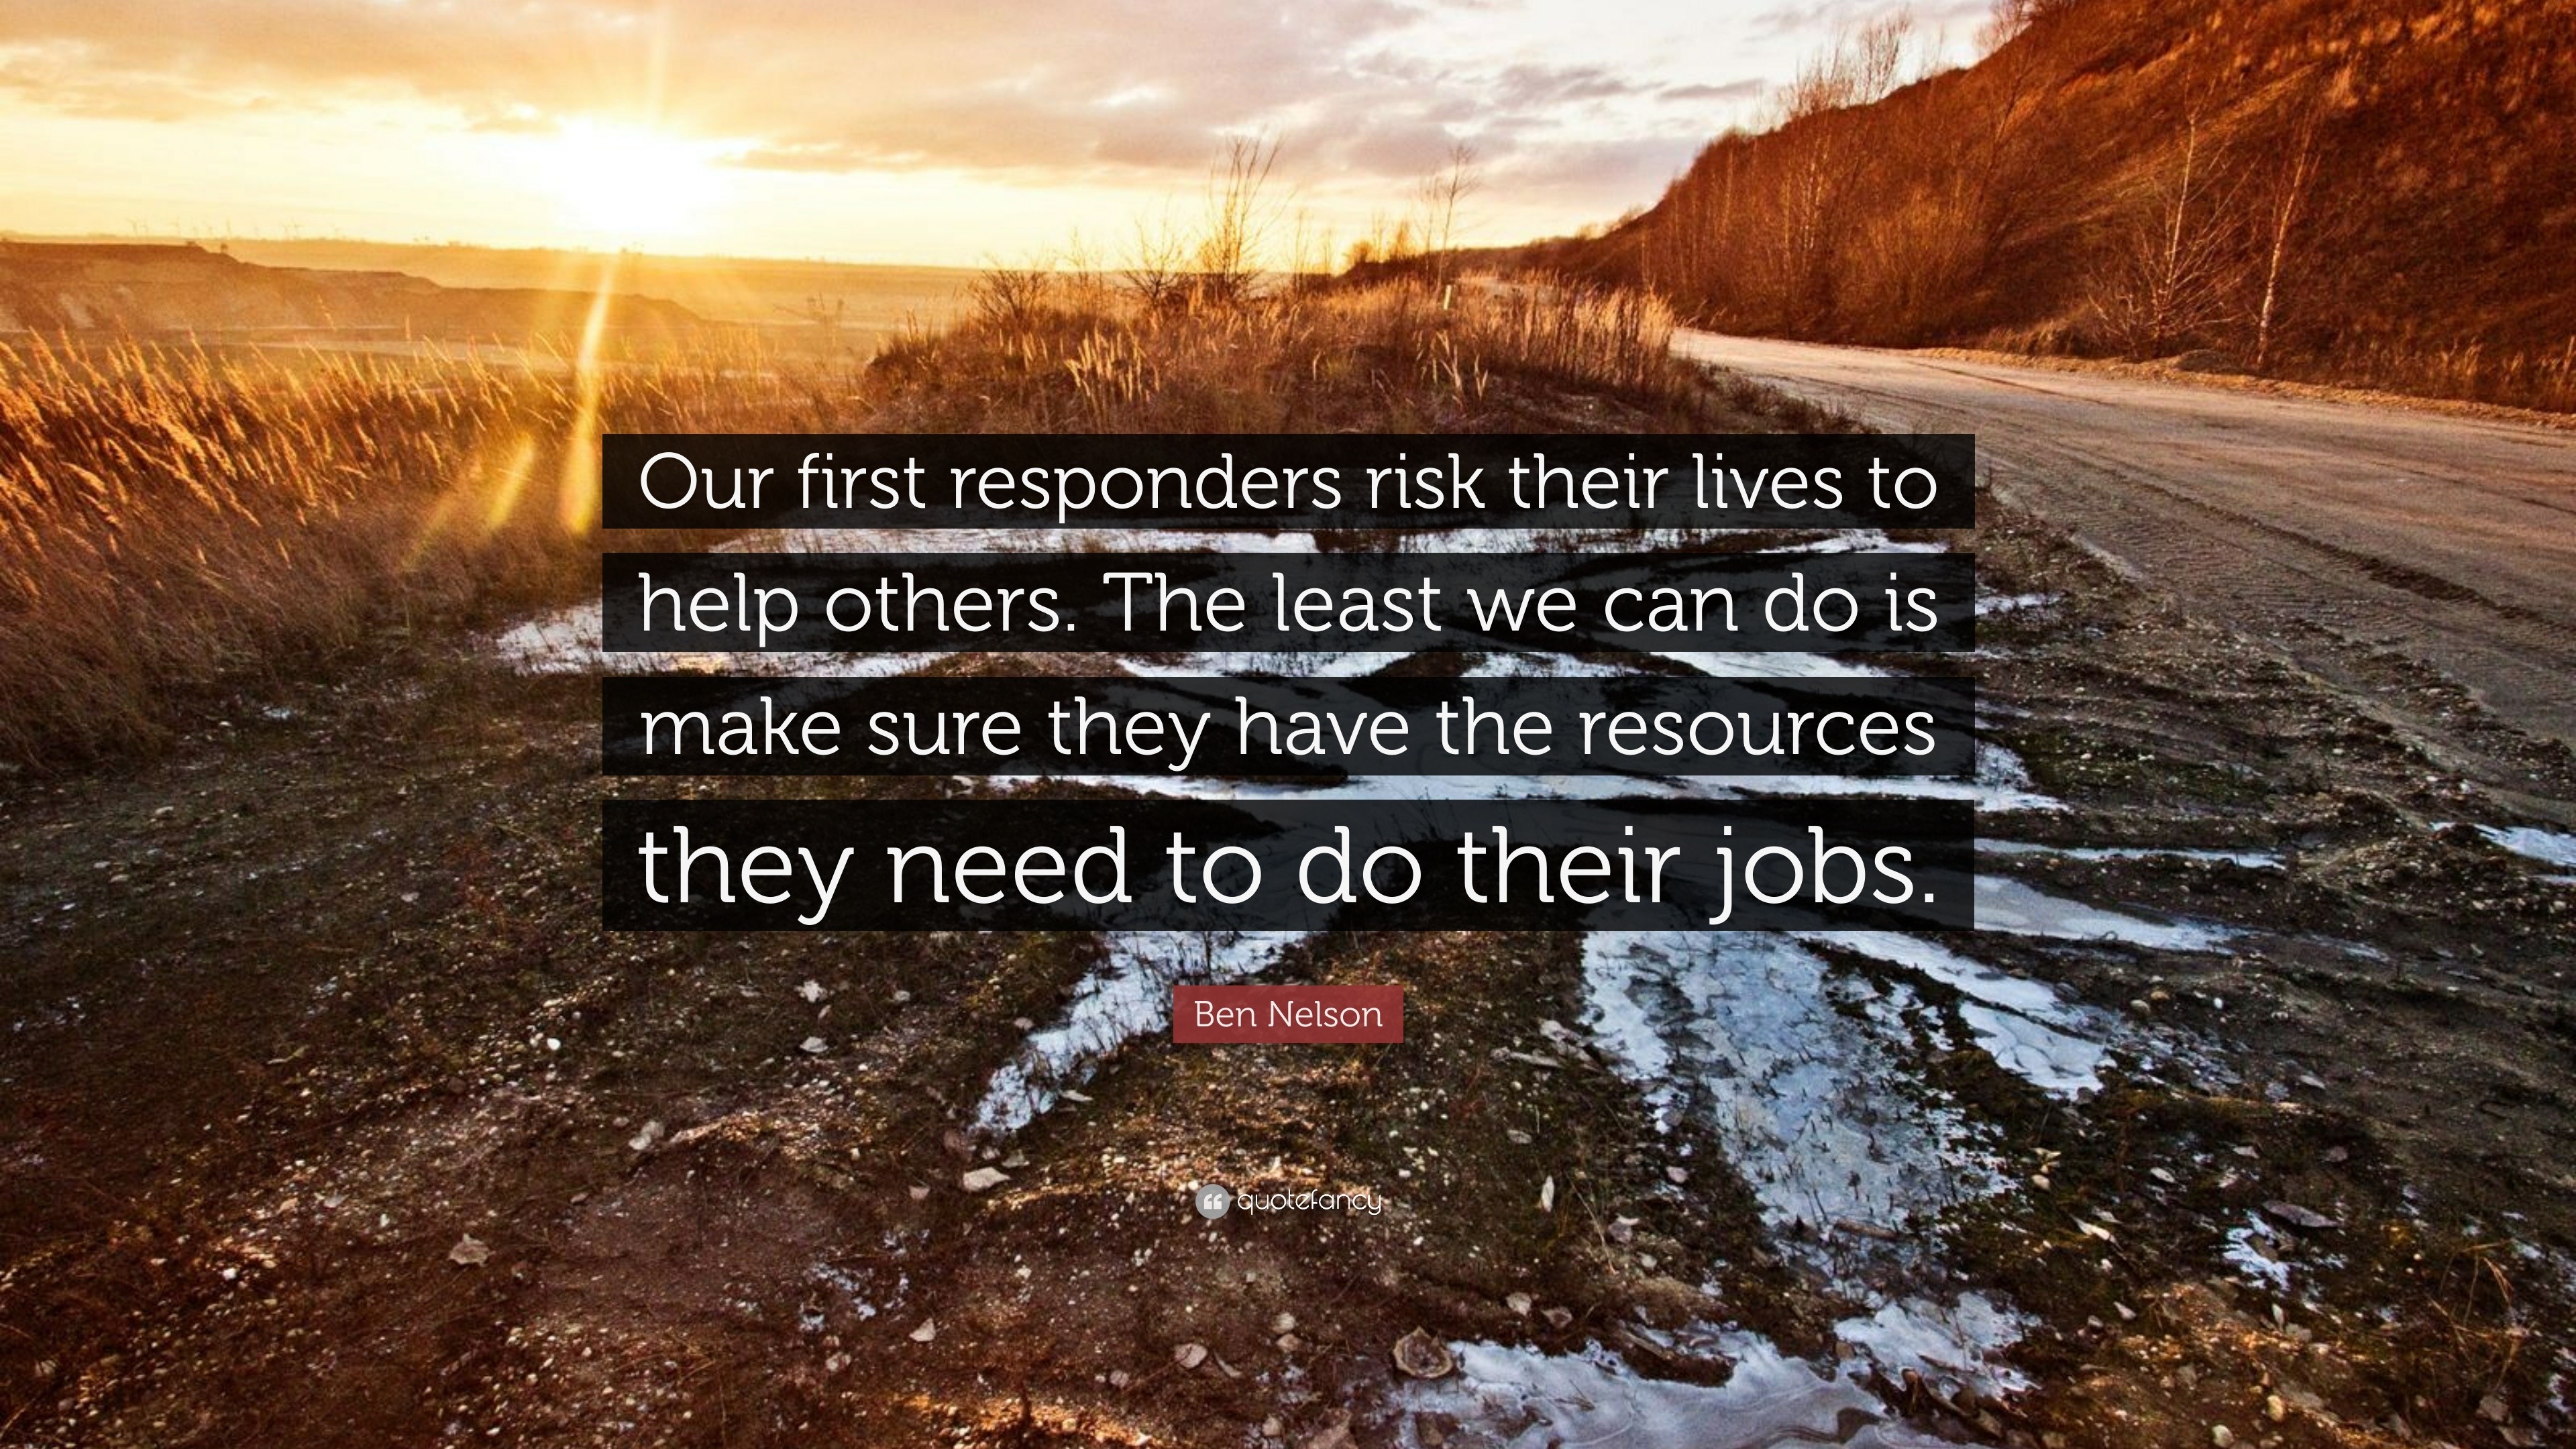 ben-nelson-quote-our-first-responders-risk-their-lives-to-help-others